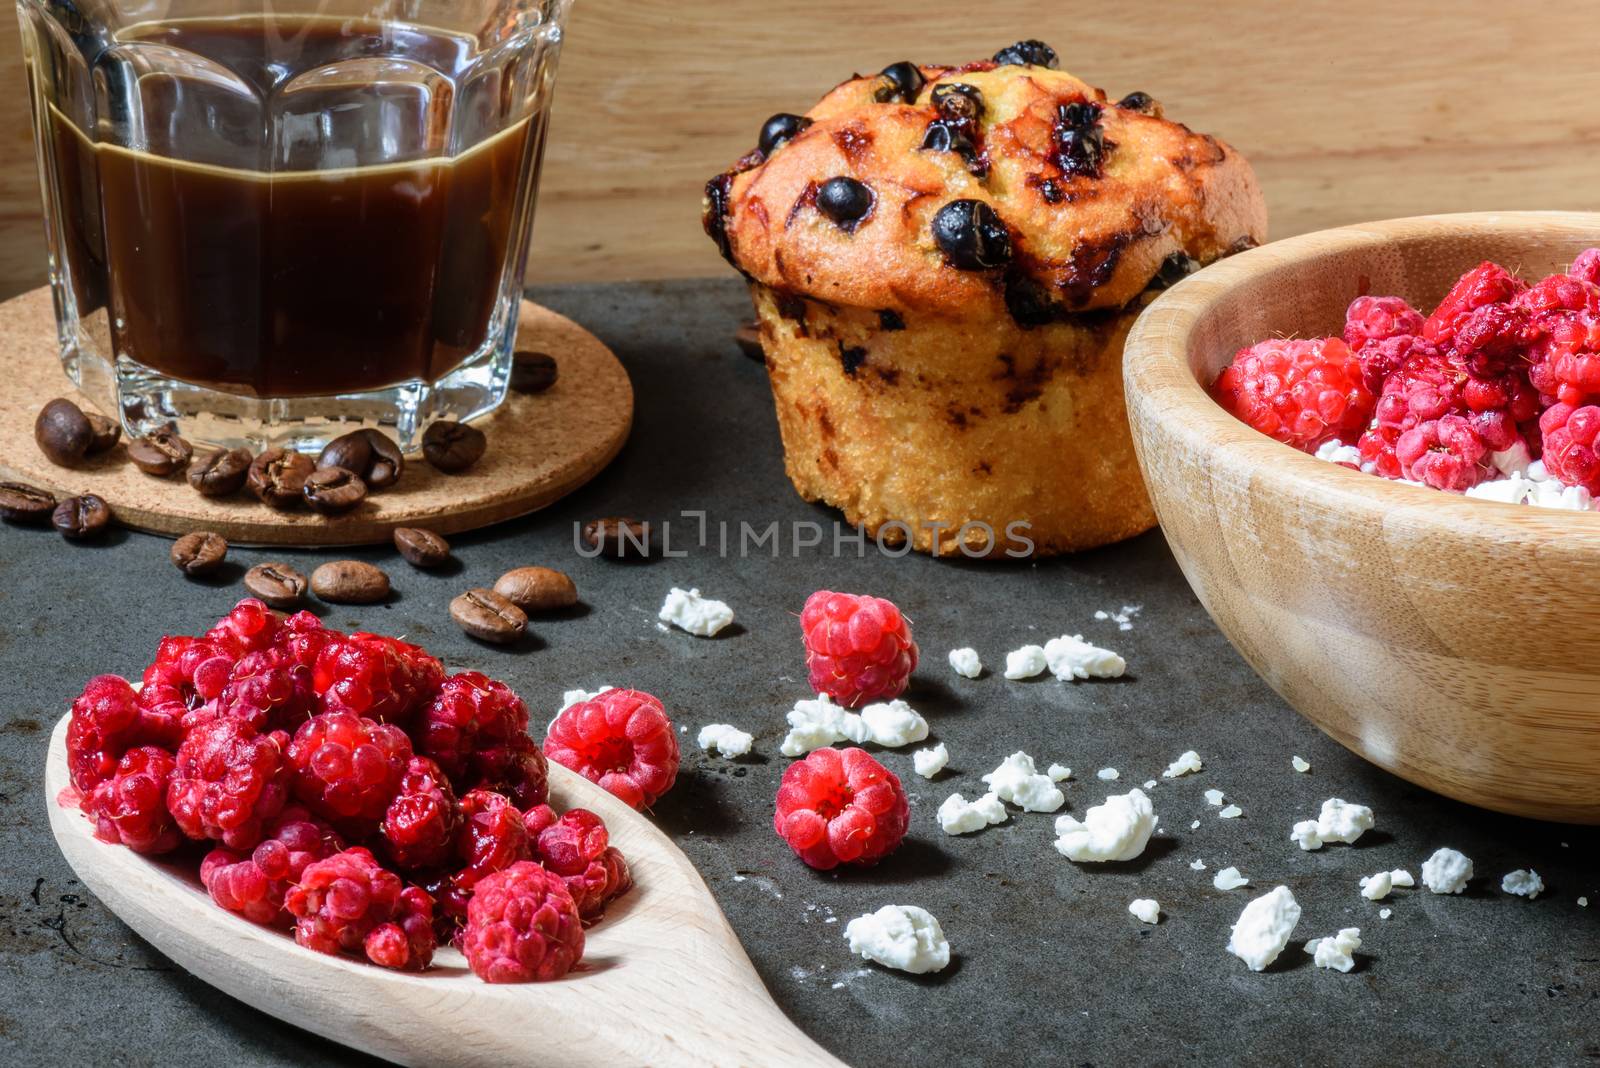 Curd with raspberries, coffee in a cup and blueberry muffin for breakfast by Seva_blsv